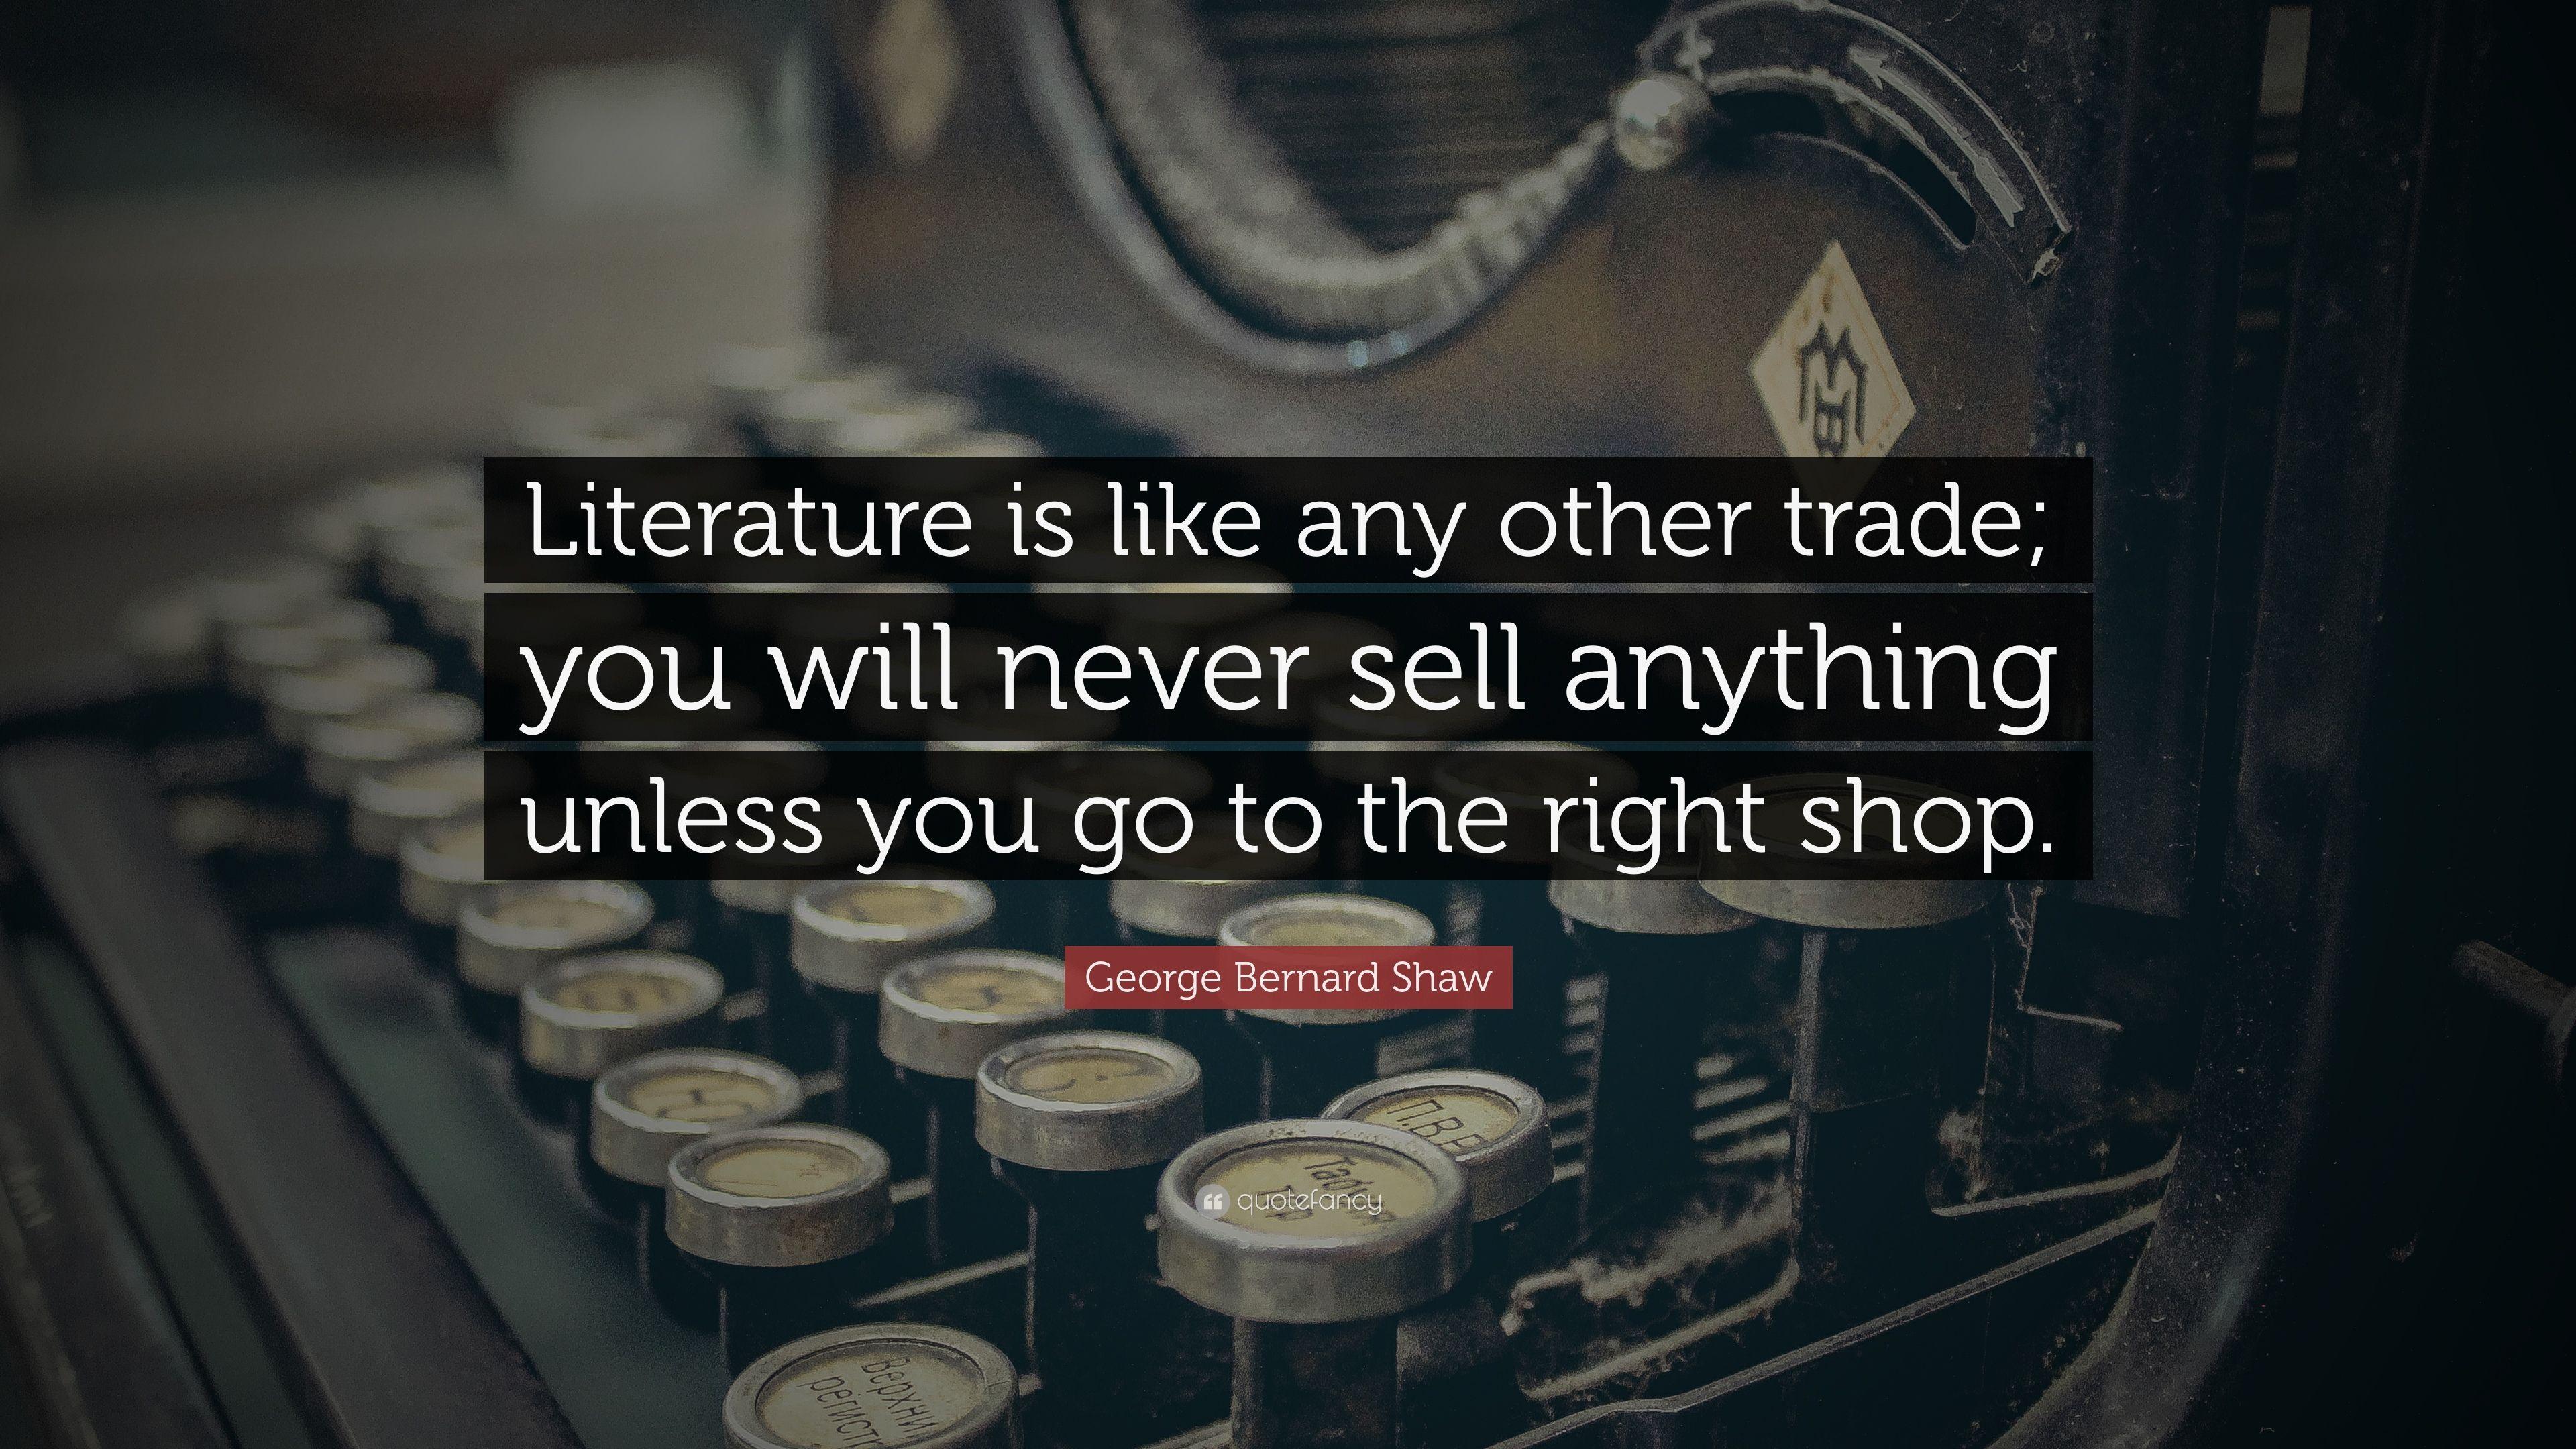 George Bernard Shaw Quote: “Literature is like any other trade